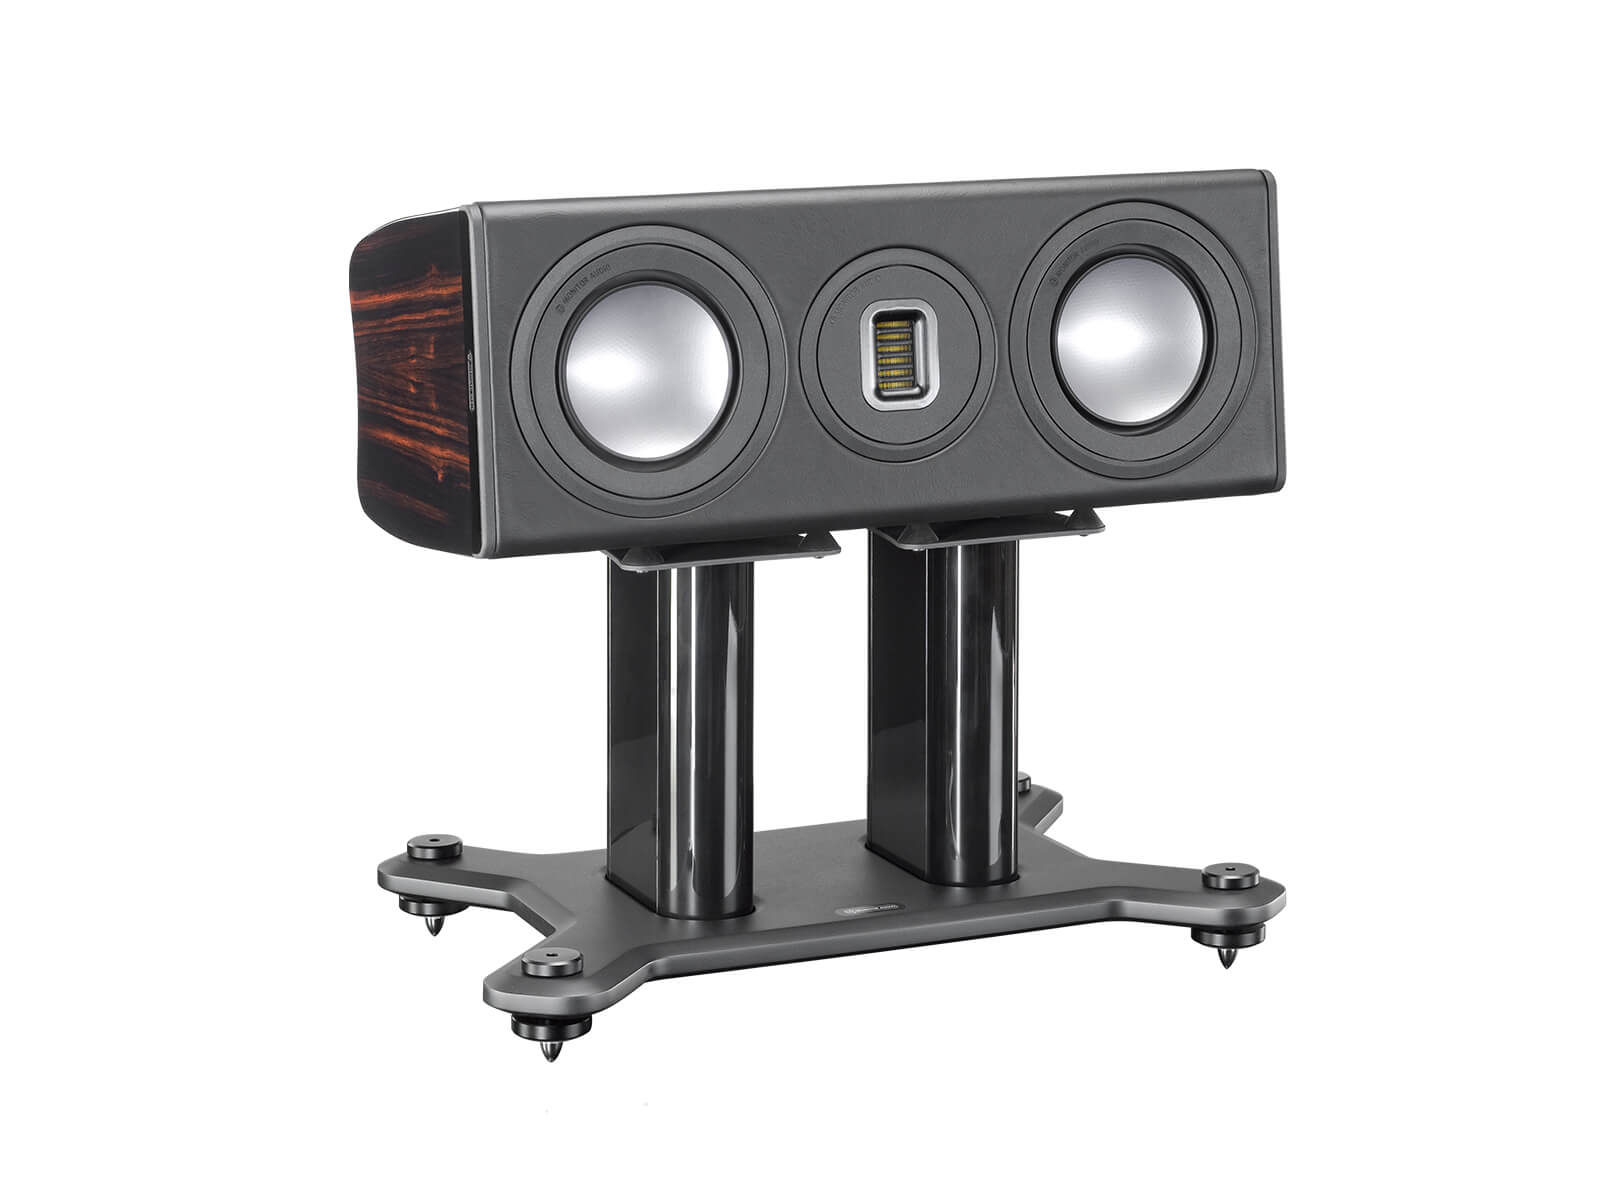 Platinum PLC150 II, centre channel speakers, featuring a grille and an ebony real wood veneer finish.